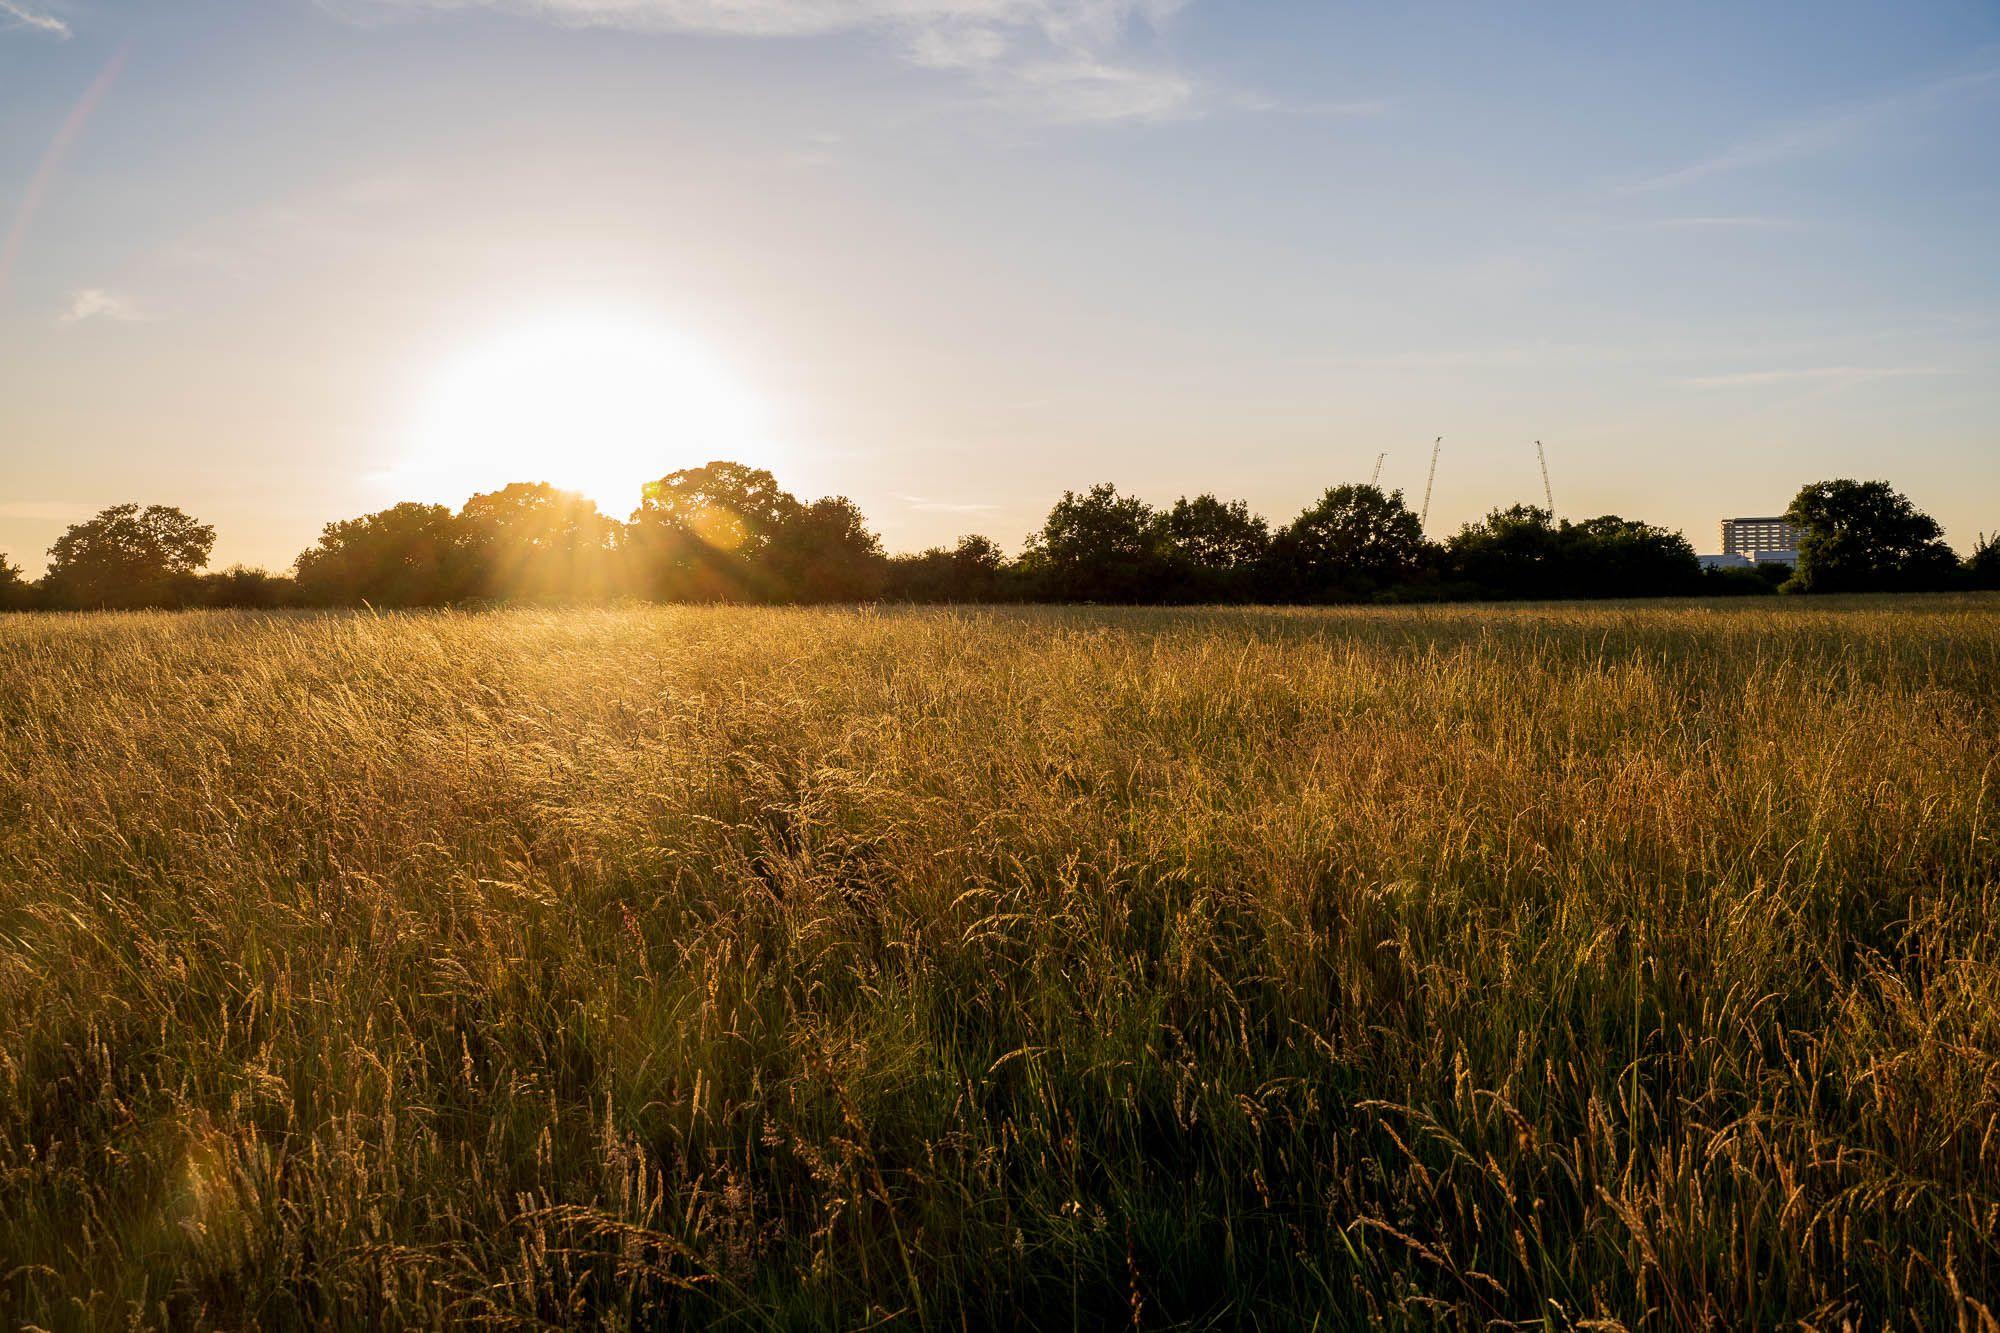 The sun sets over Tolworth Court Farm, sun light shimmers, reflected off of tall grasses.